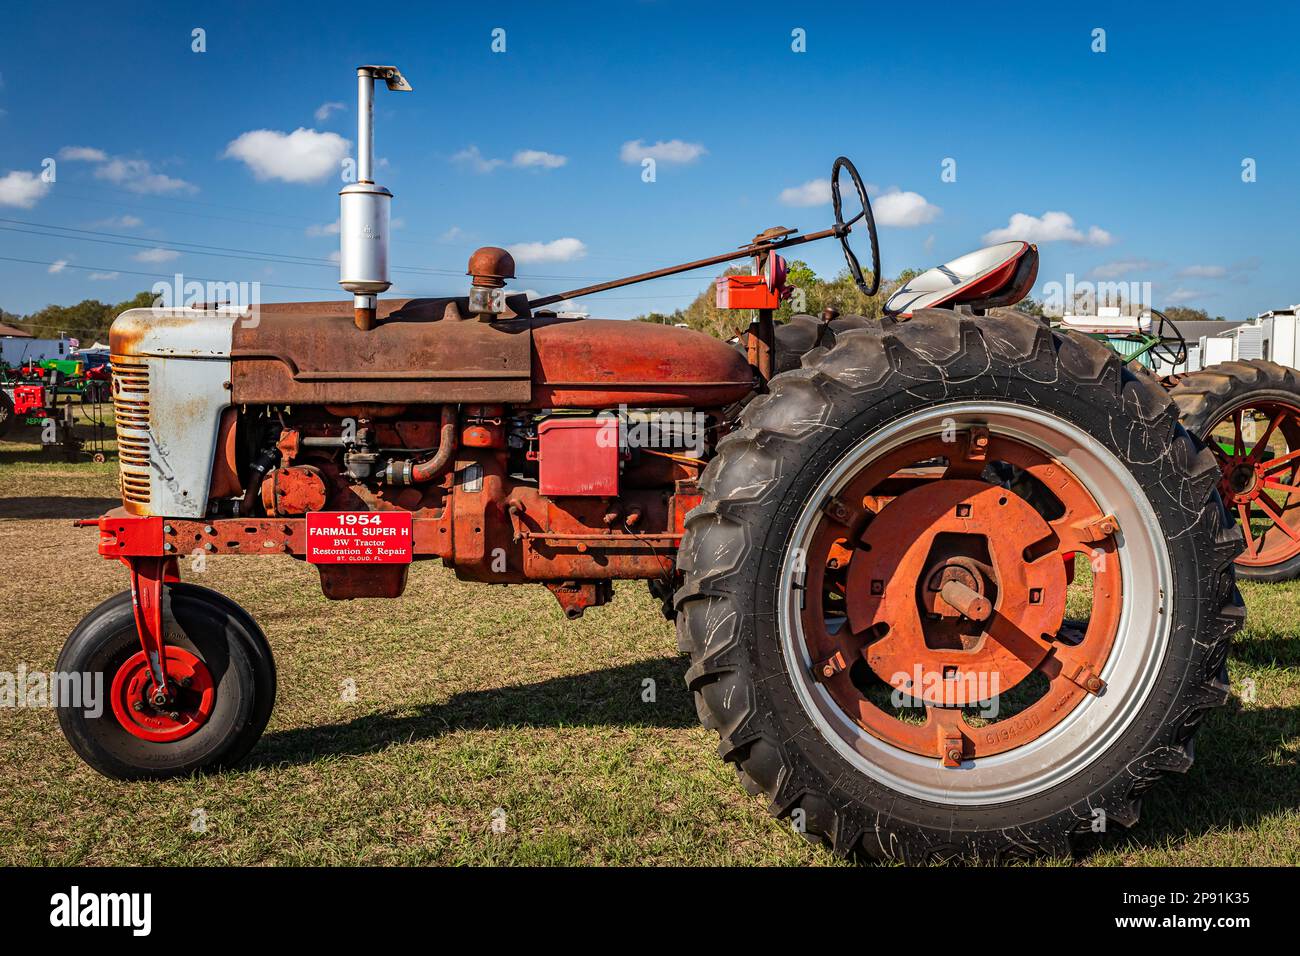 Fort Meade, FL - February 26, 2022: High perspective side view of a 1954 International Harvester McCormick Farmall Super H Tractor at a local tractor Stock Photo